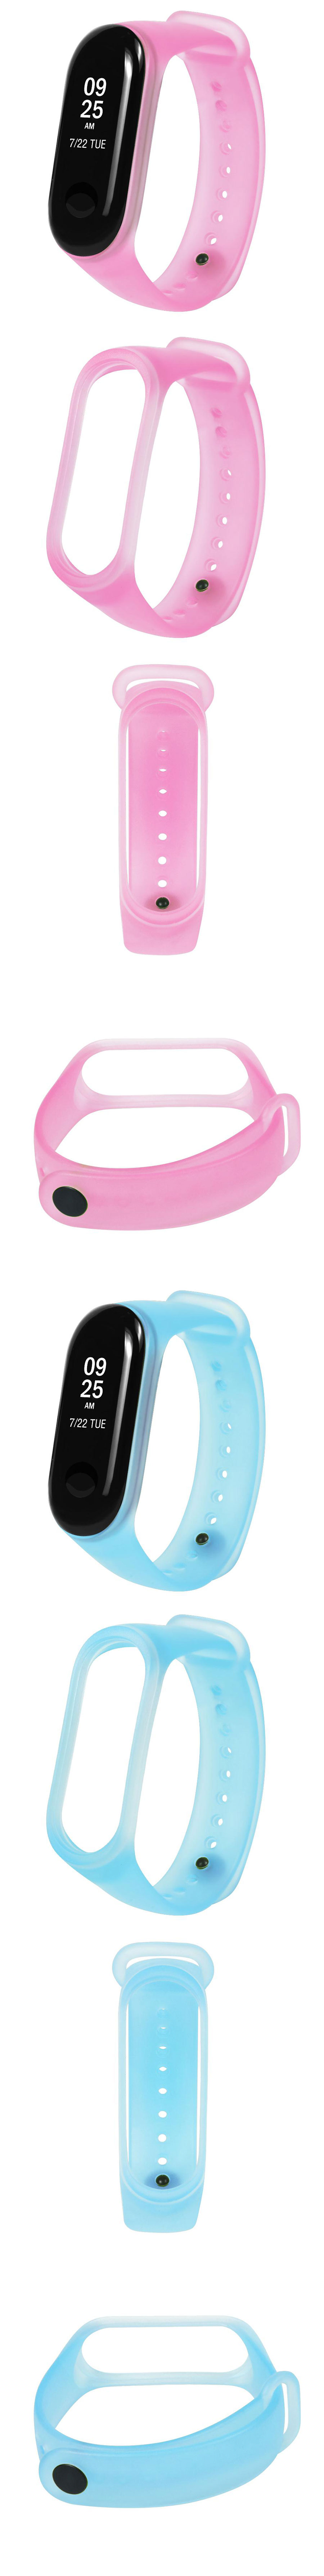 Bakeey Jelly Translucent Colorful TPE Watch Band Strap Replacement for Xiaomi Miband 3 Non-original